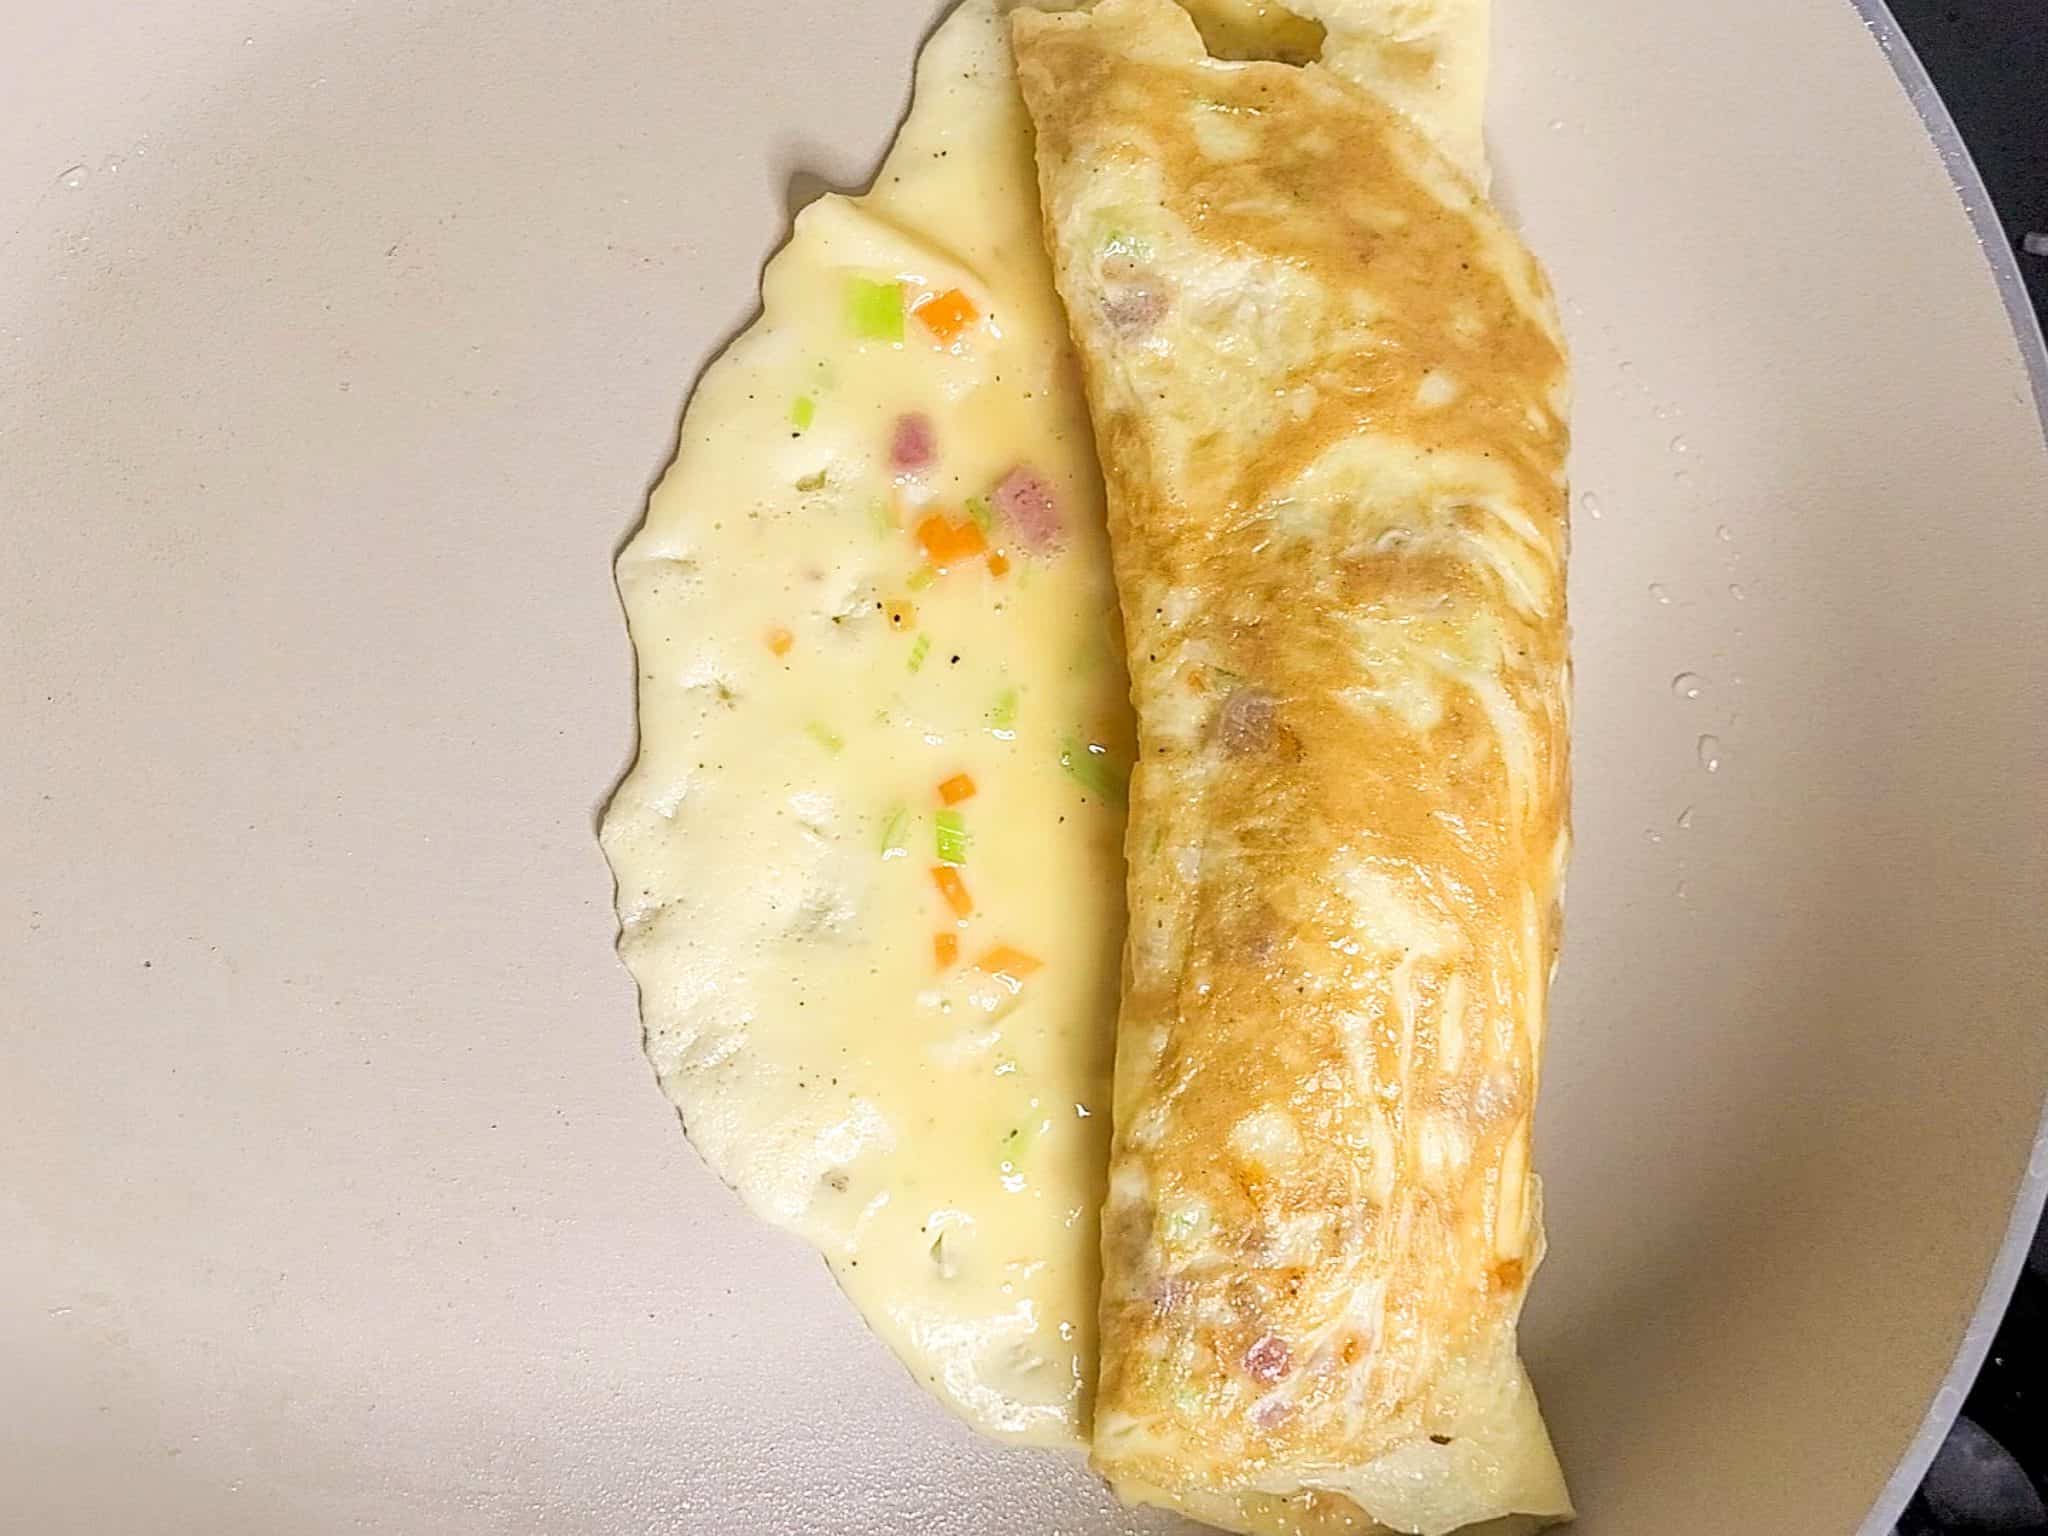 Egg omelet halfway rolled in a pan